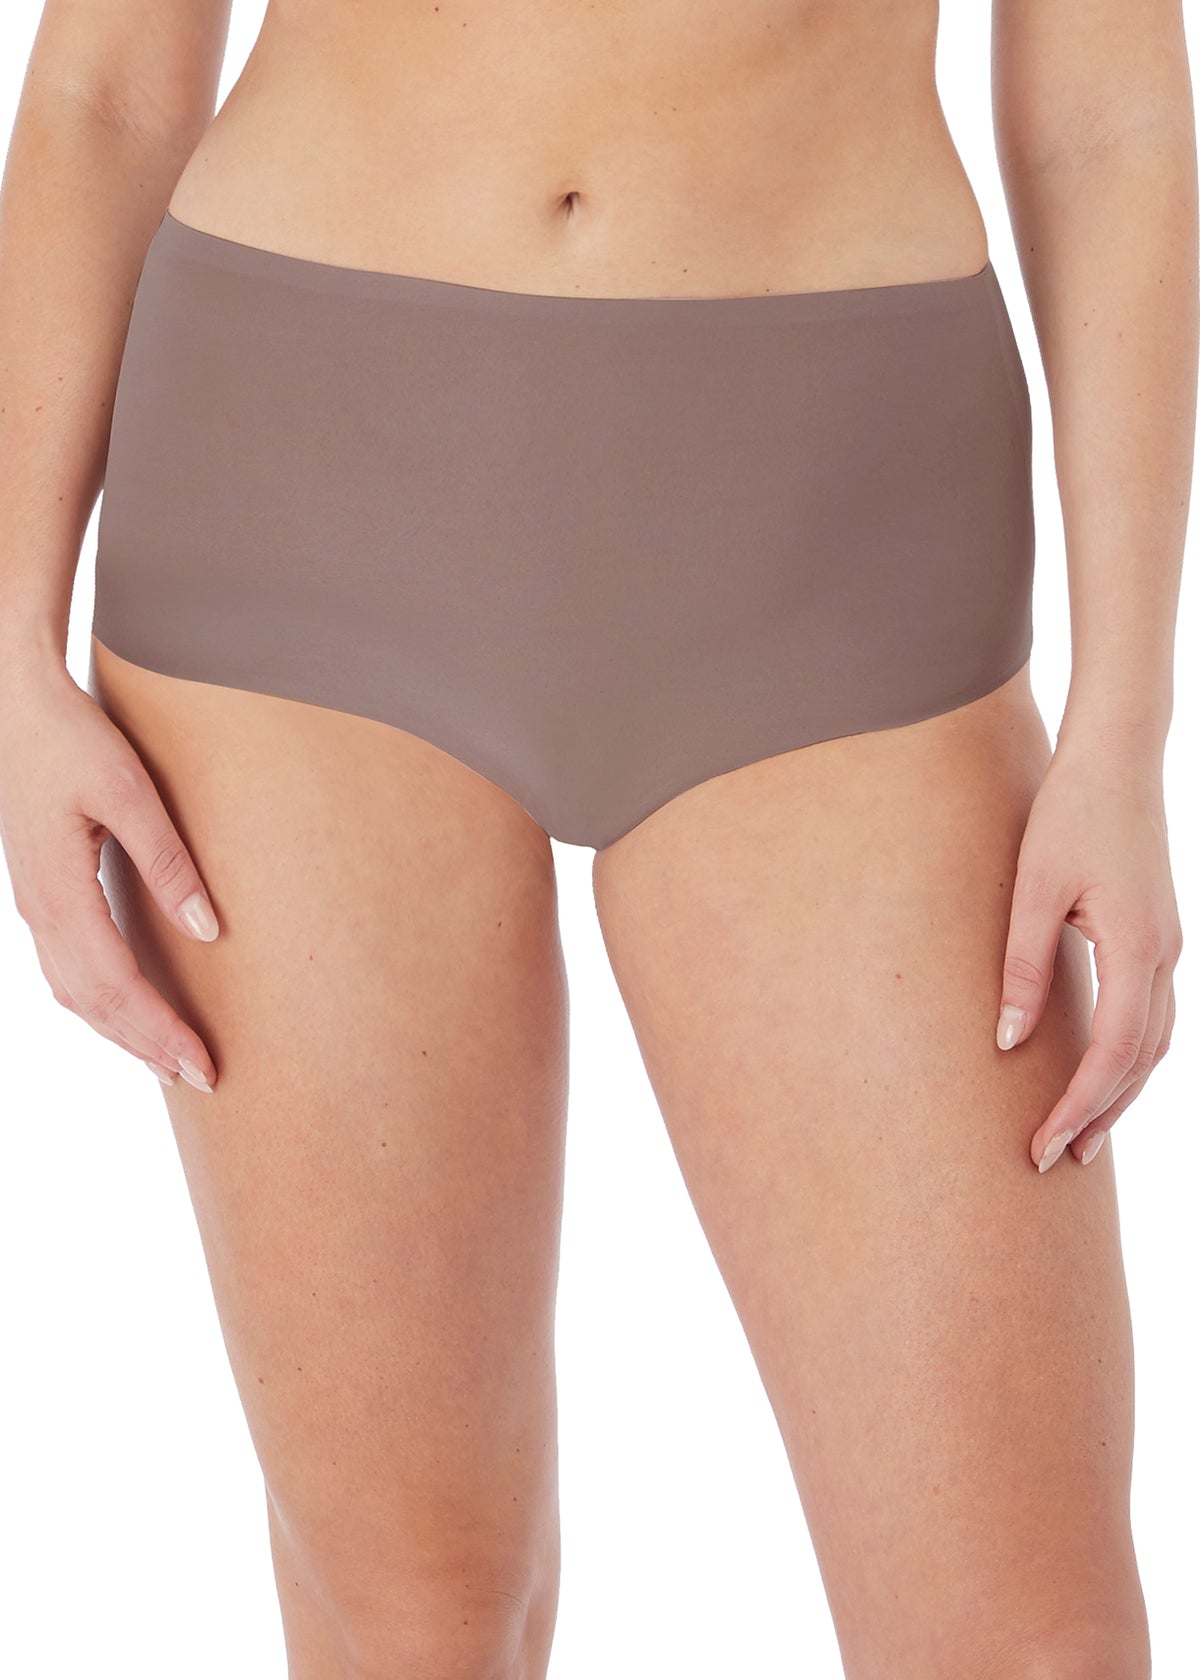 Fantasie Smoothease Invisible Stretch Full Brief - Taupe 1 Shaws Department Stores